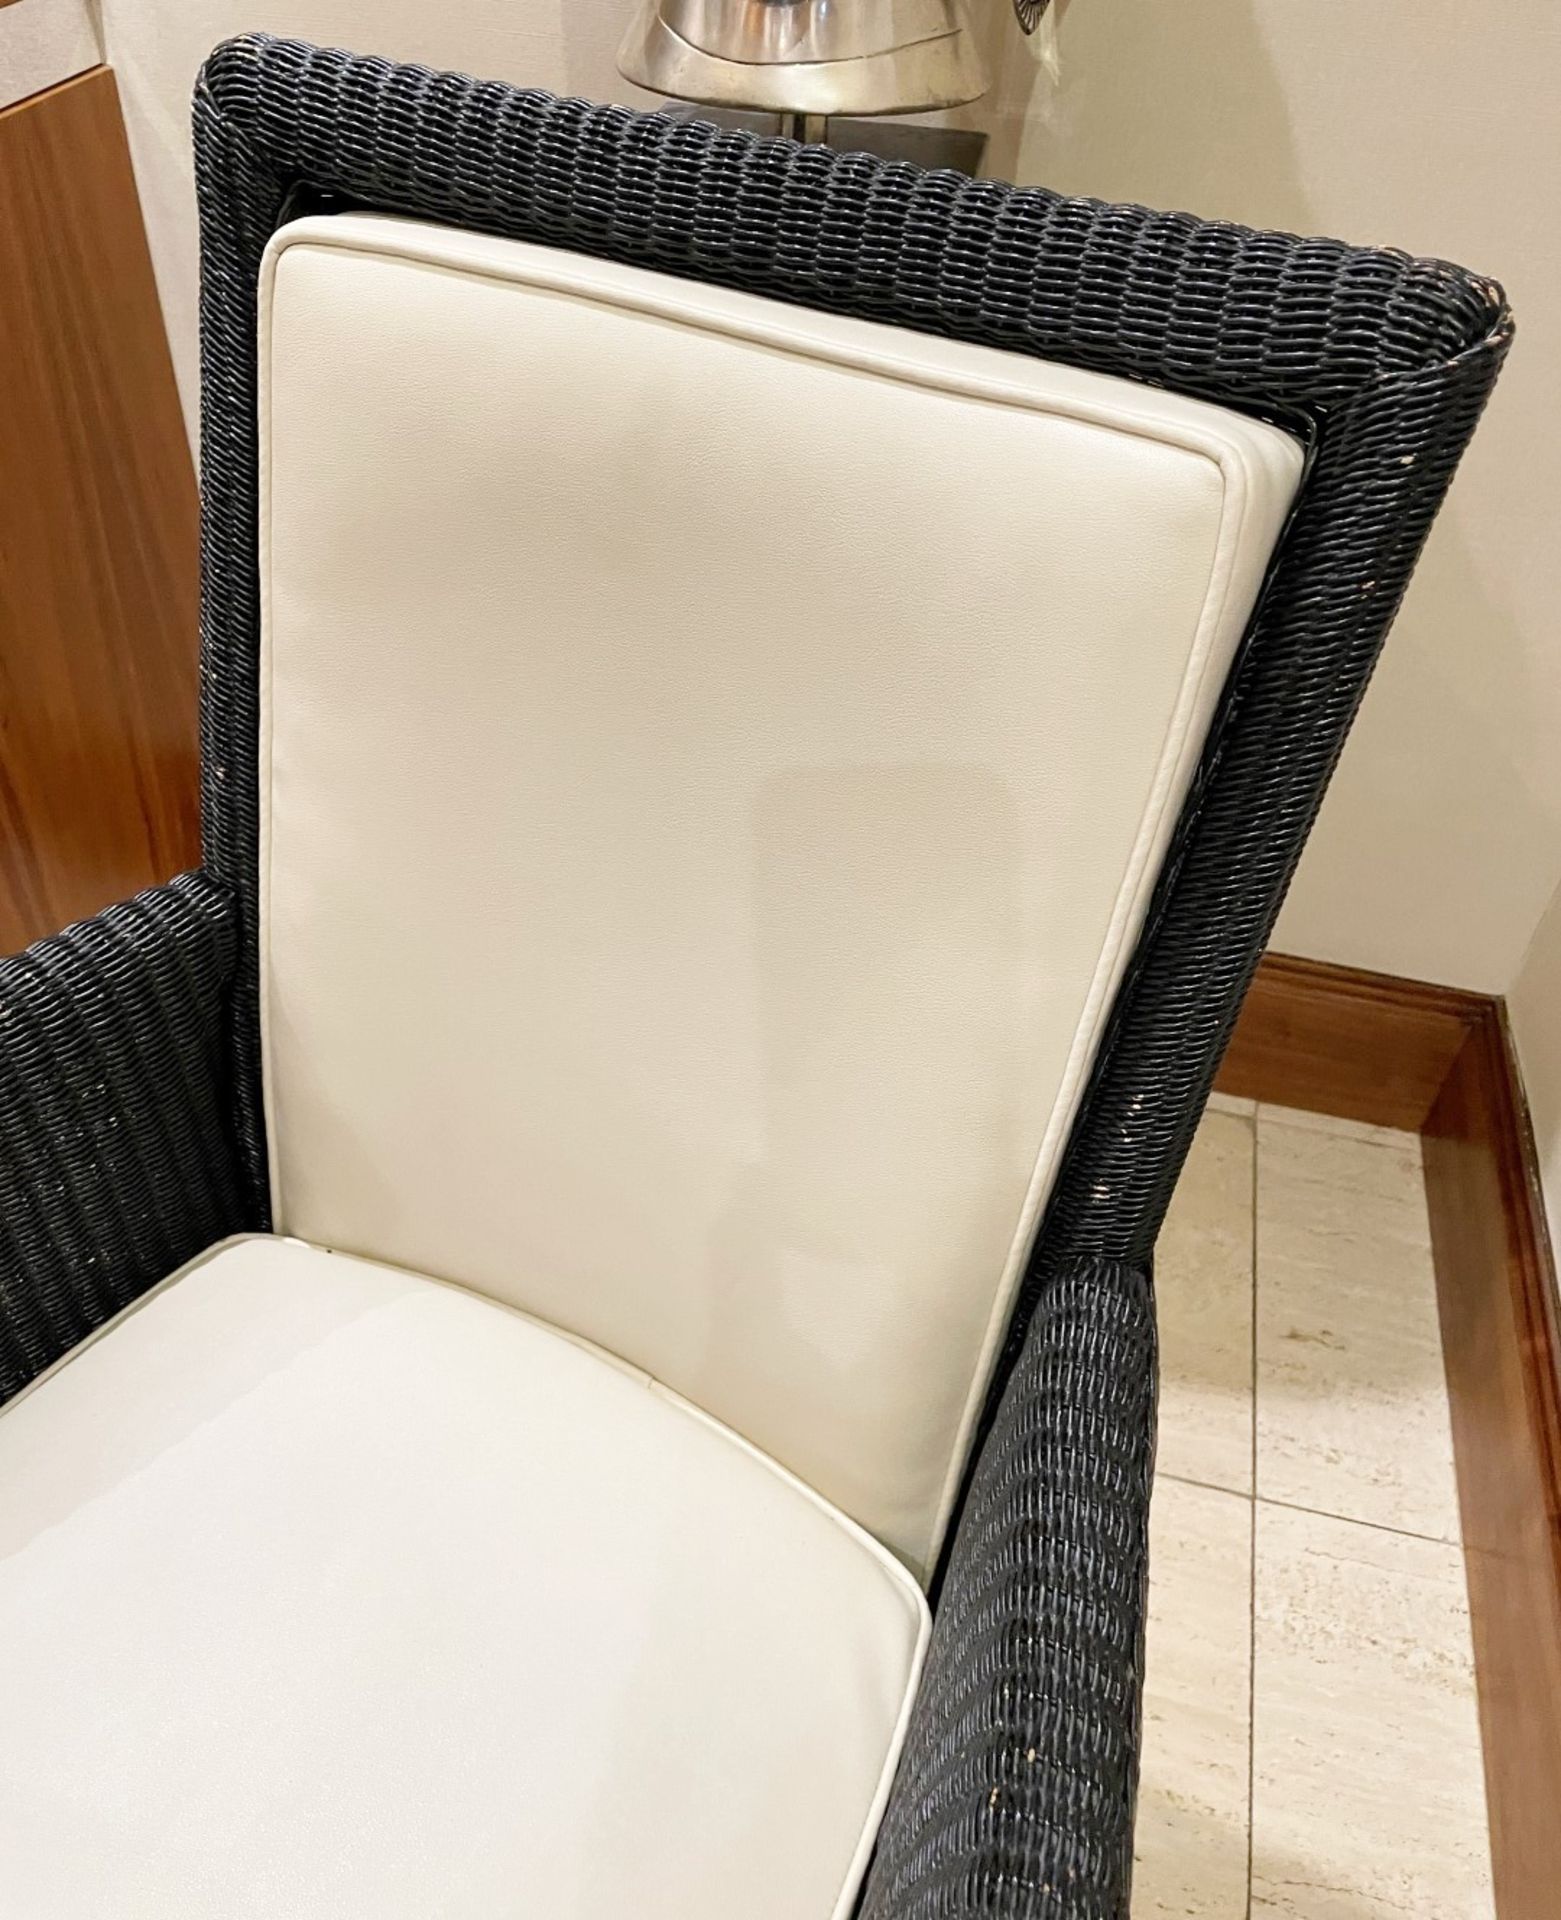 8 x Genuine LLOYD LOOM British Handmade Woven Dining Chairs With Upholstered Back And Seats - - Image 7 of 14